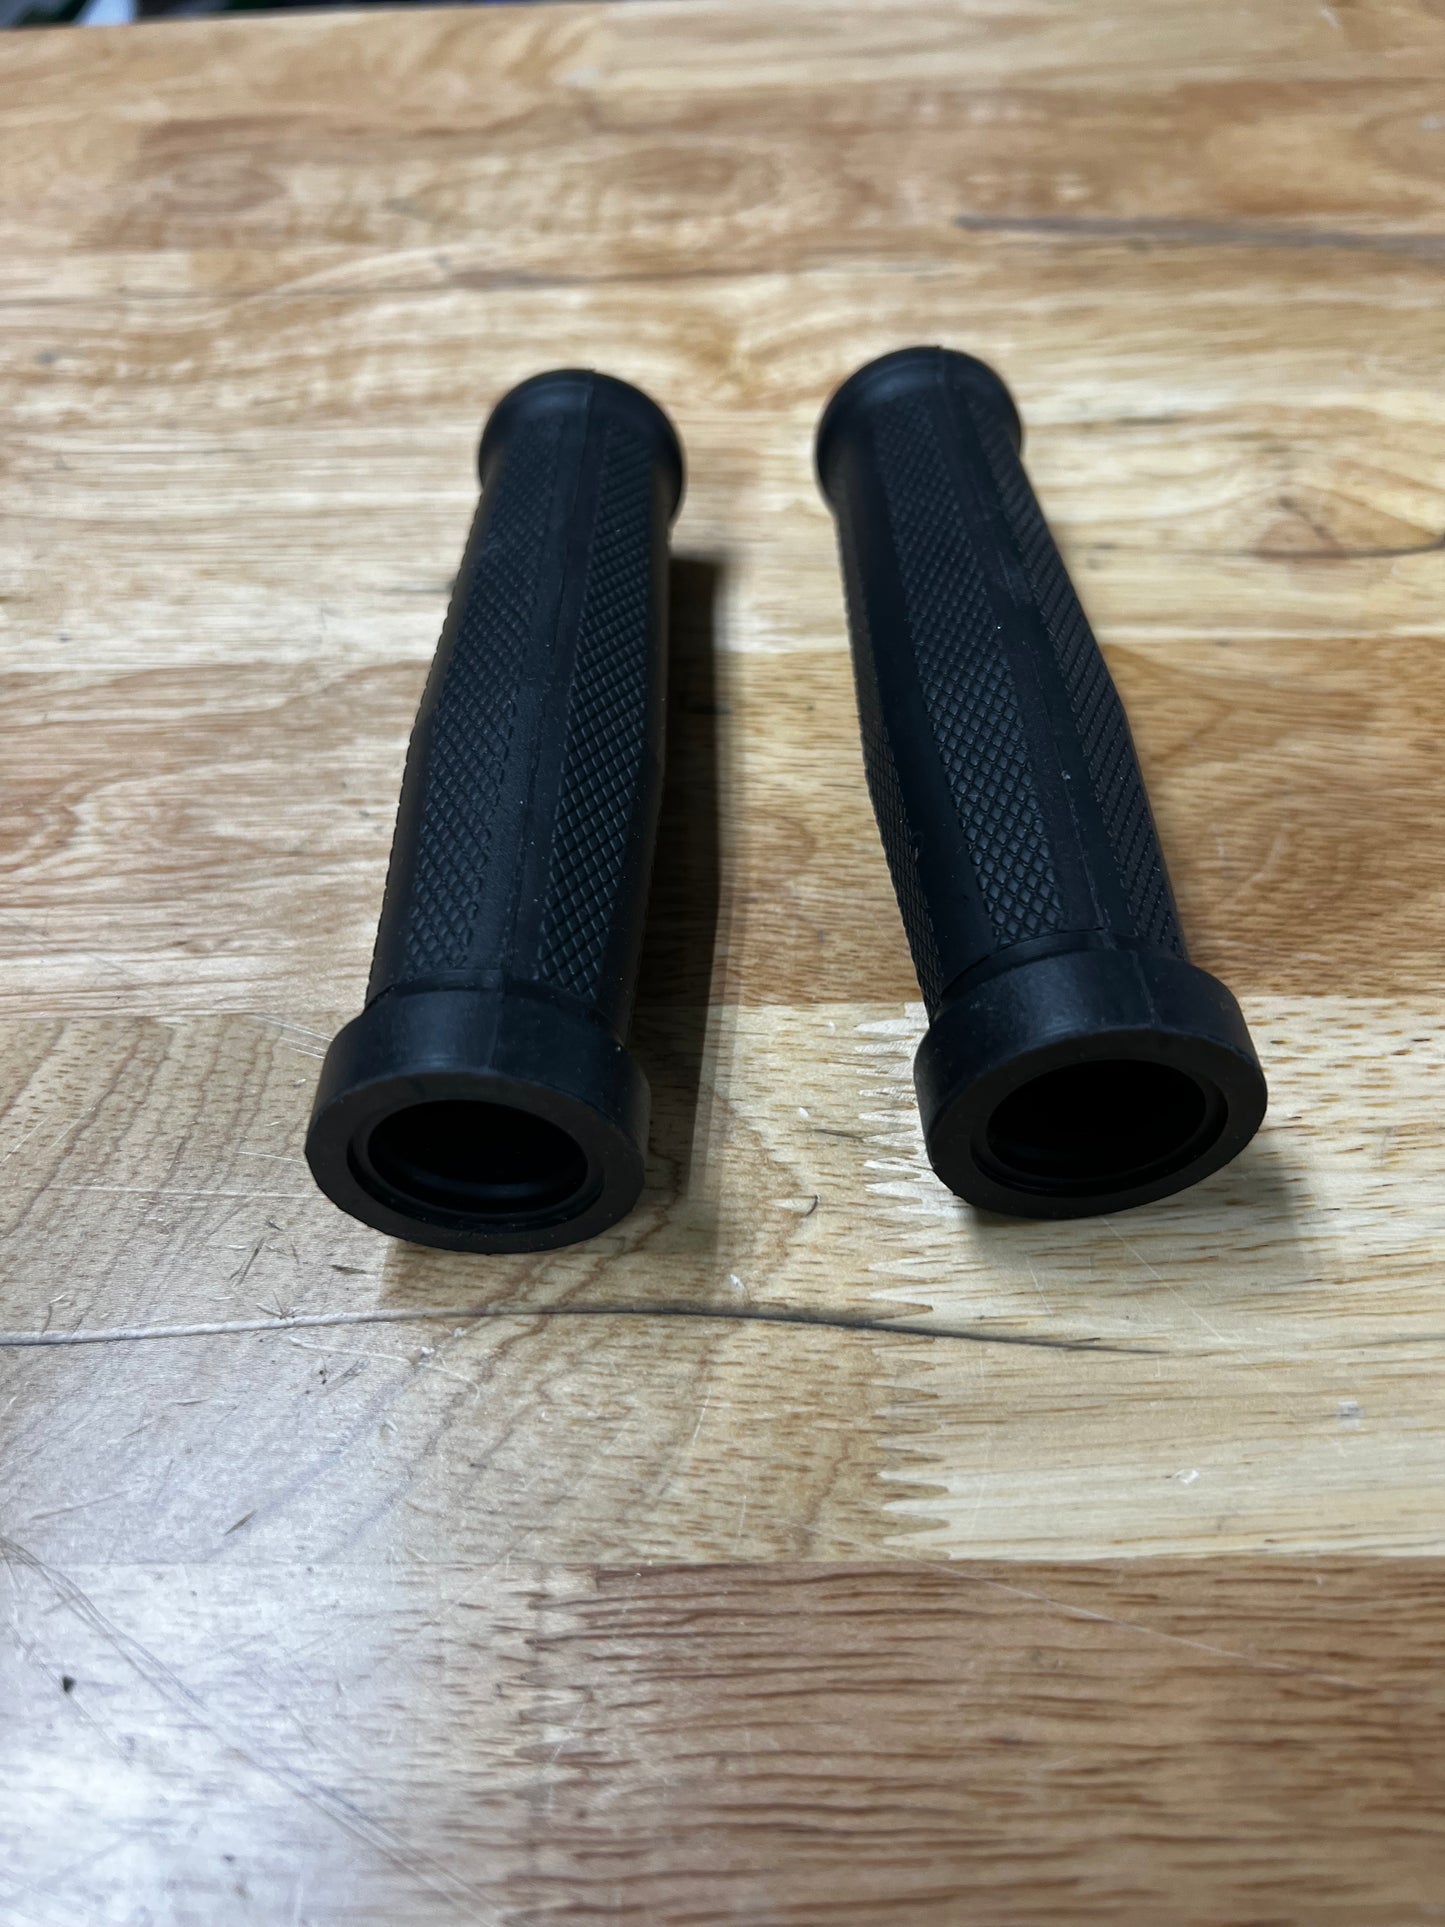 New 7/8" Older Magura Style Rubber Grips